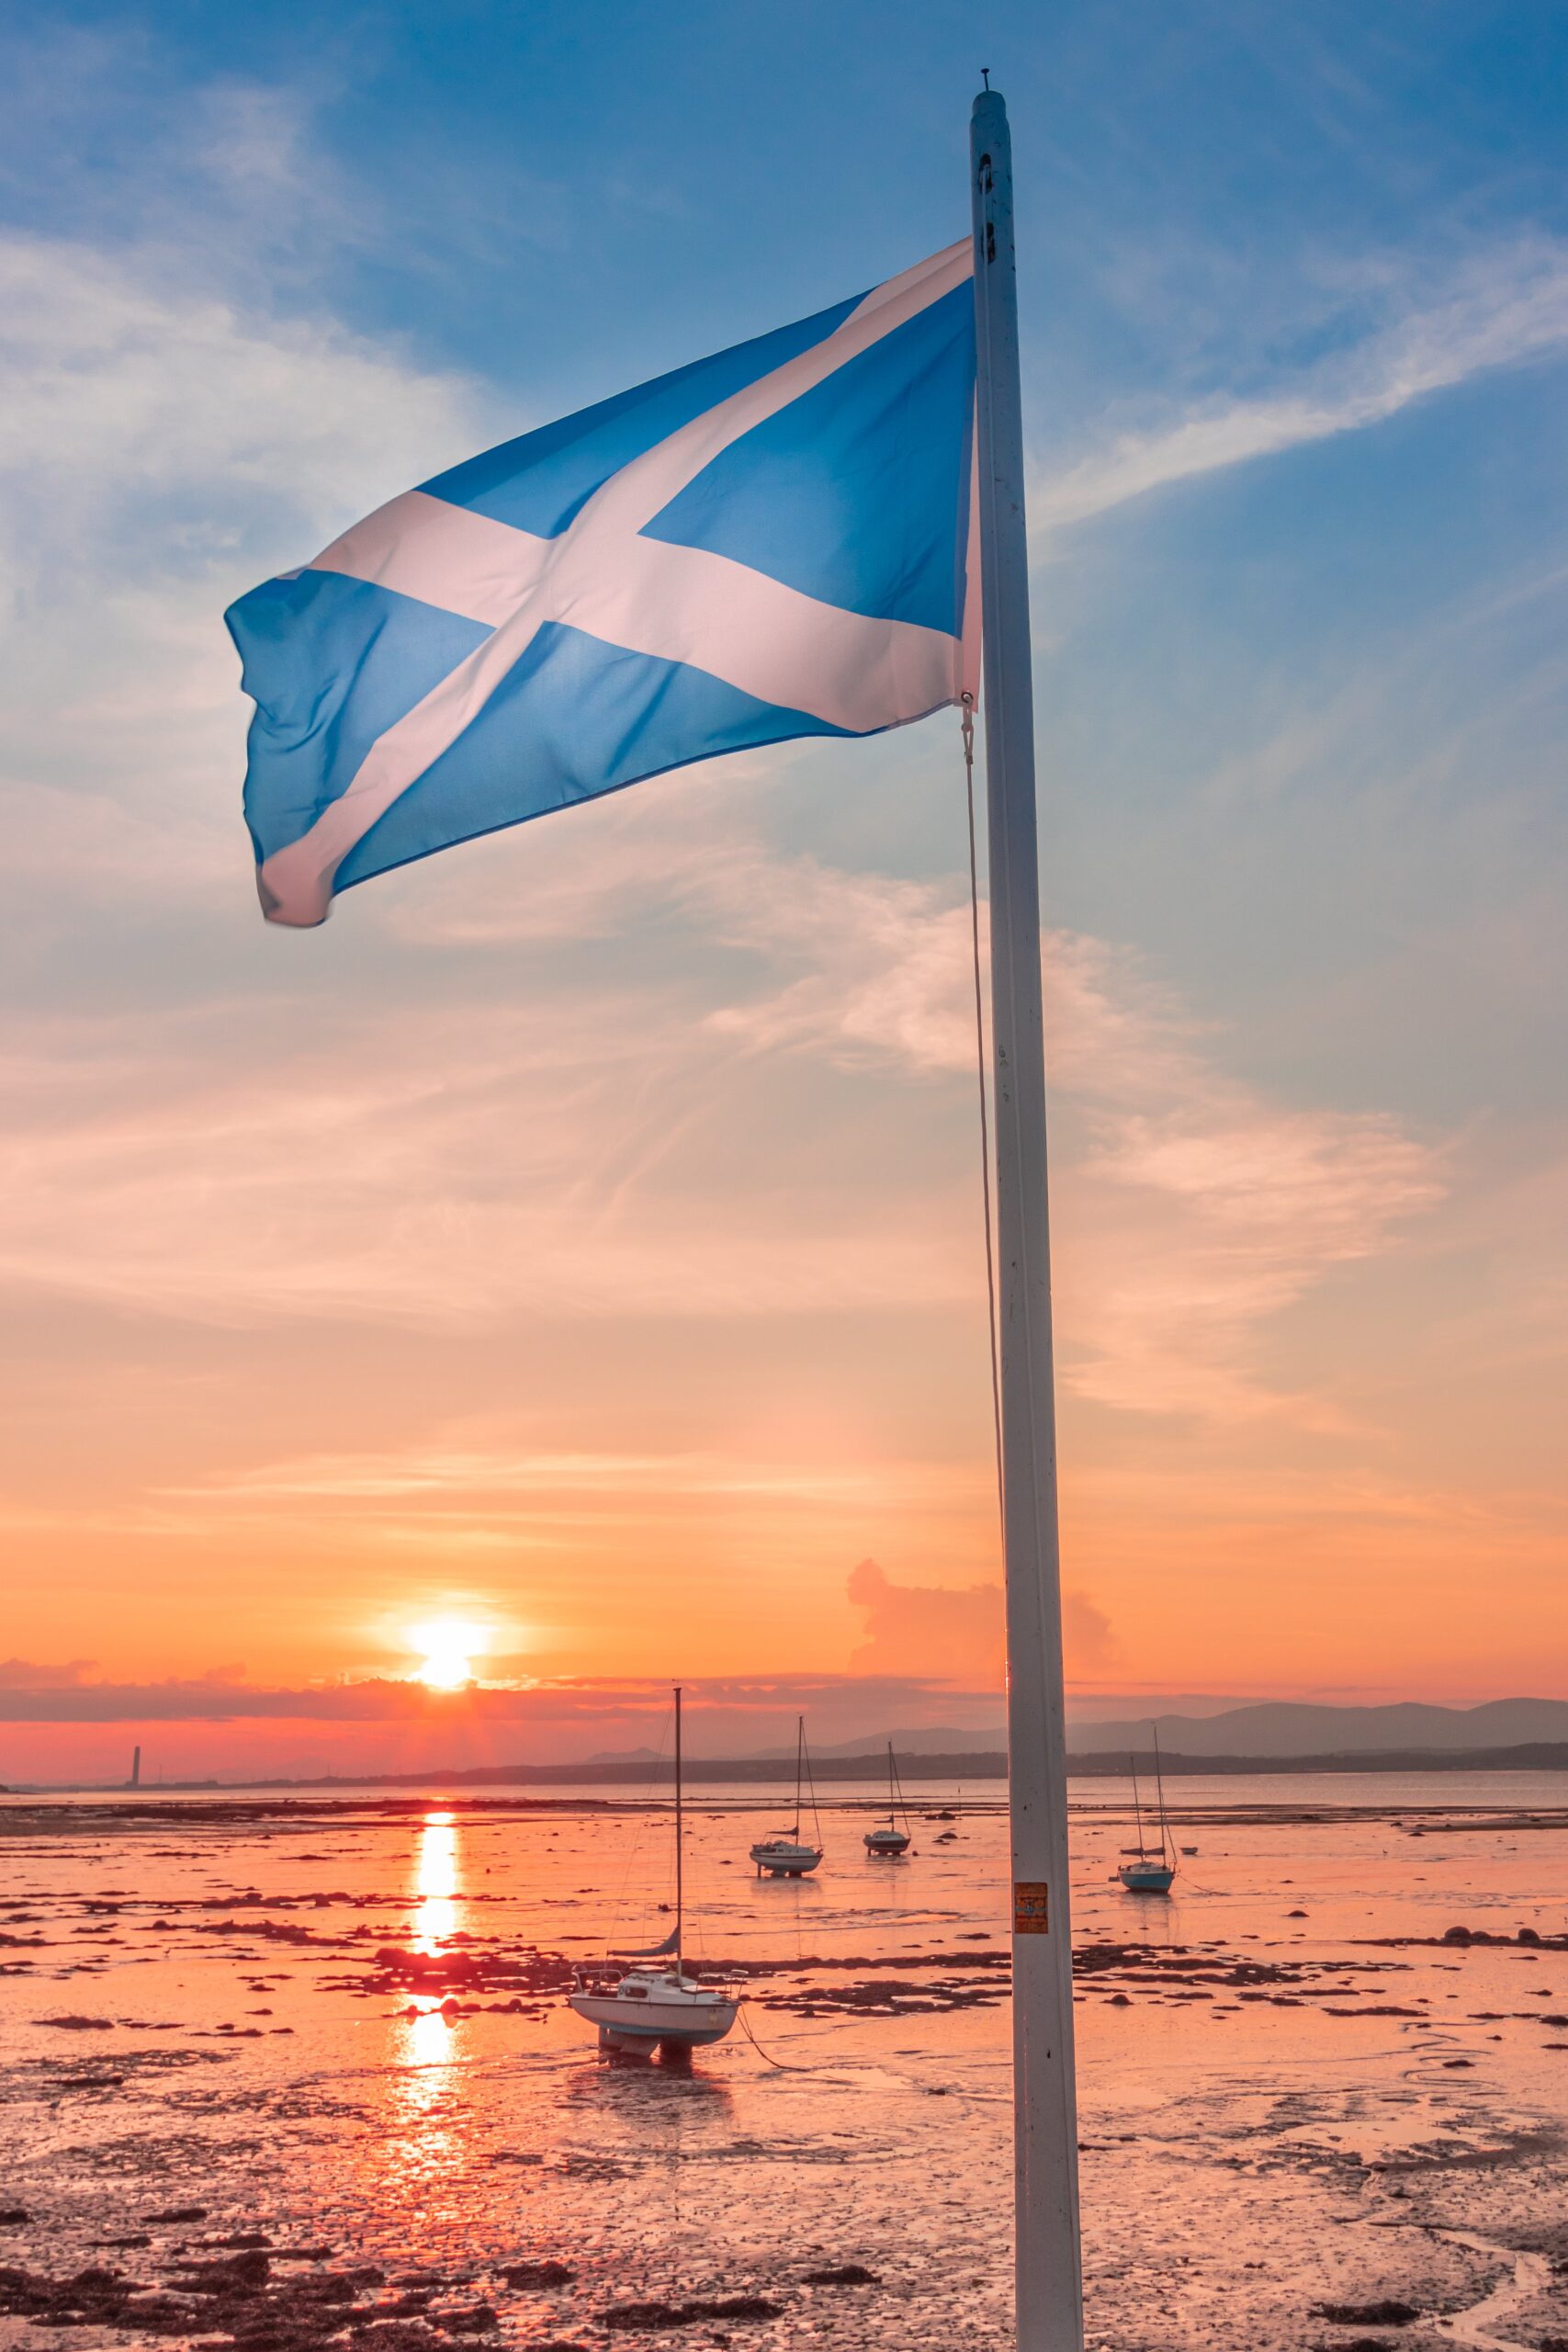 The Scottish flag on a flagpole with a beach at sunset in the background.